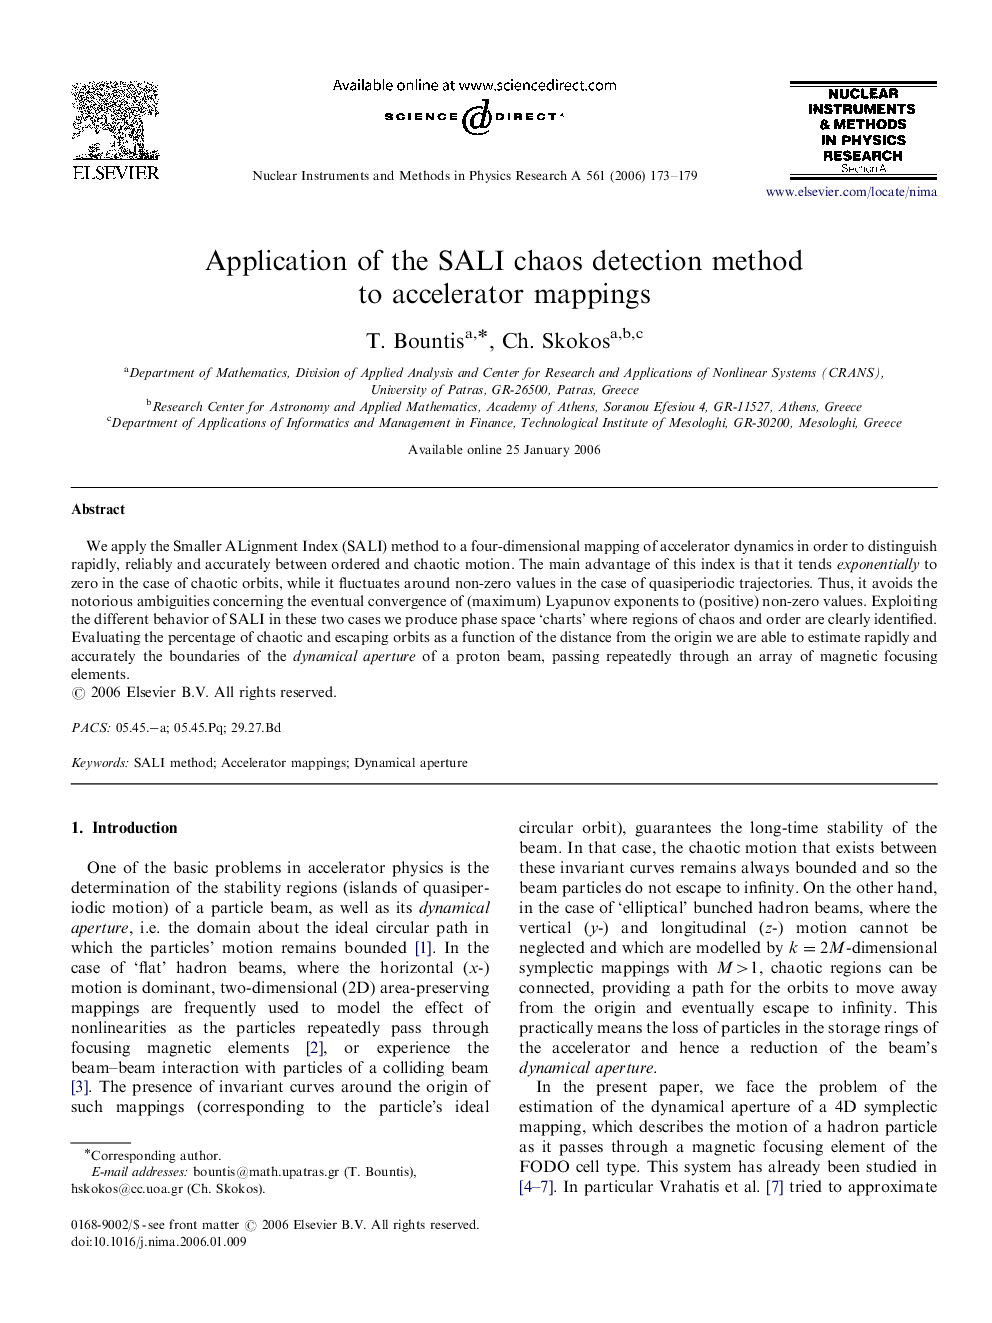 Application of the SALI chaos detection method to accelerator mappings